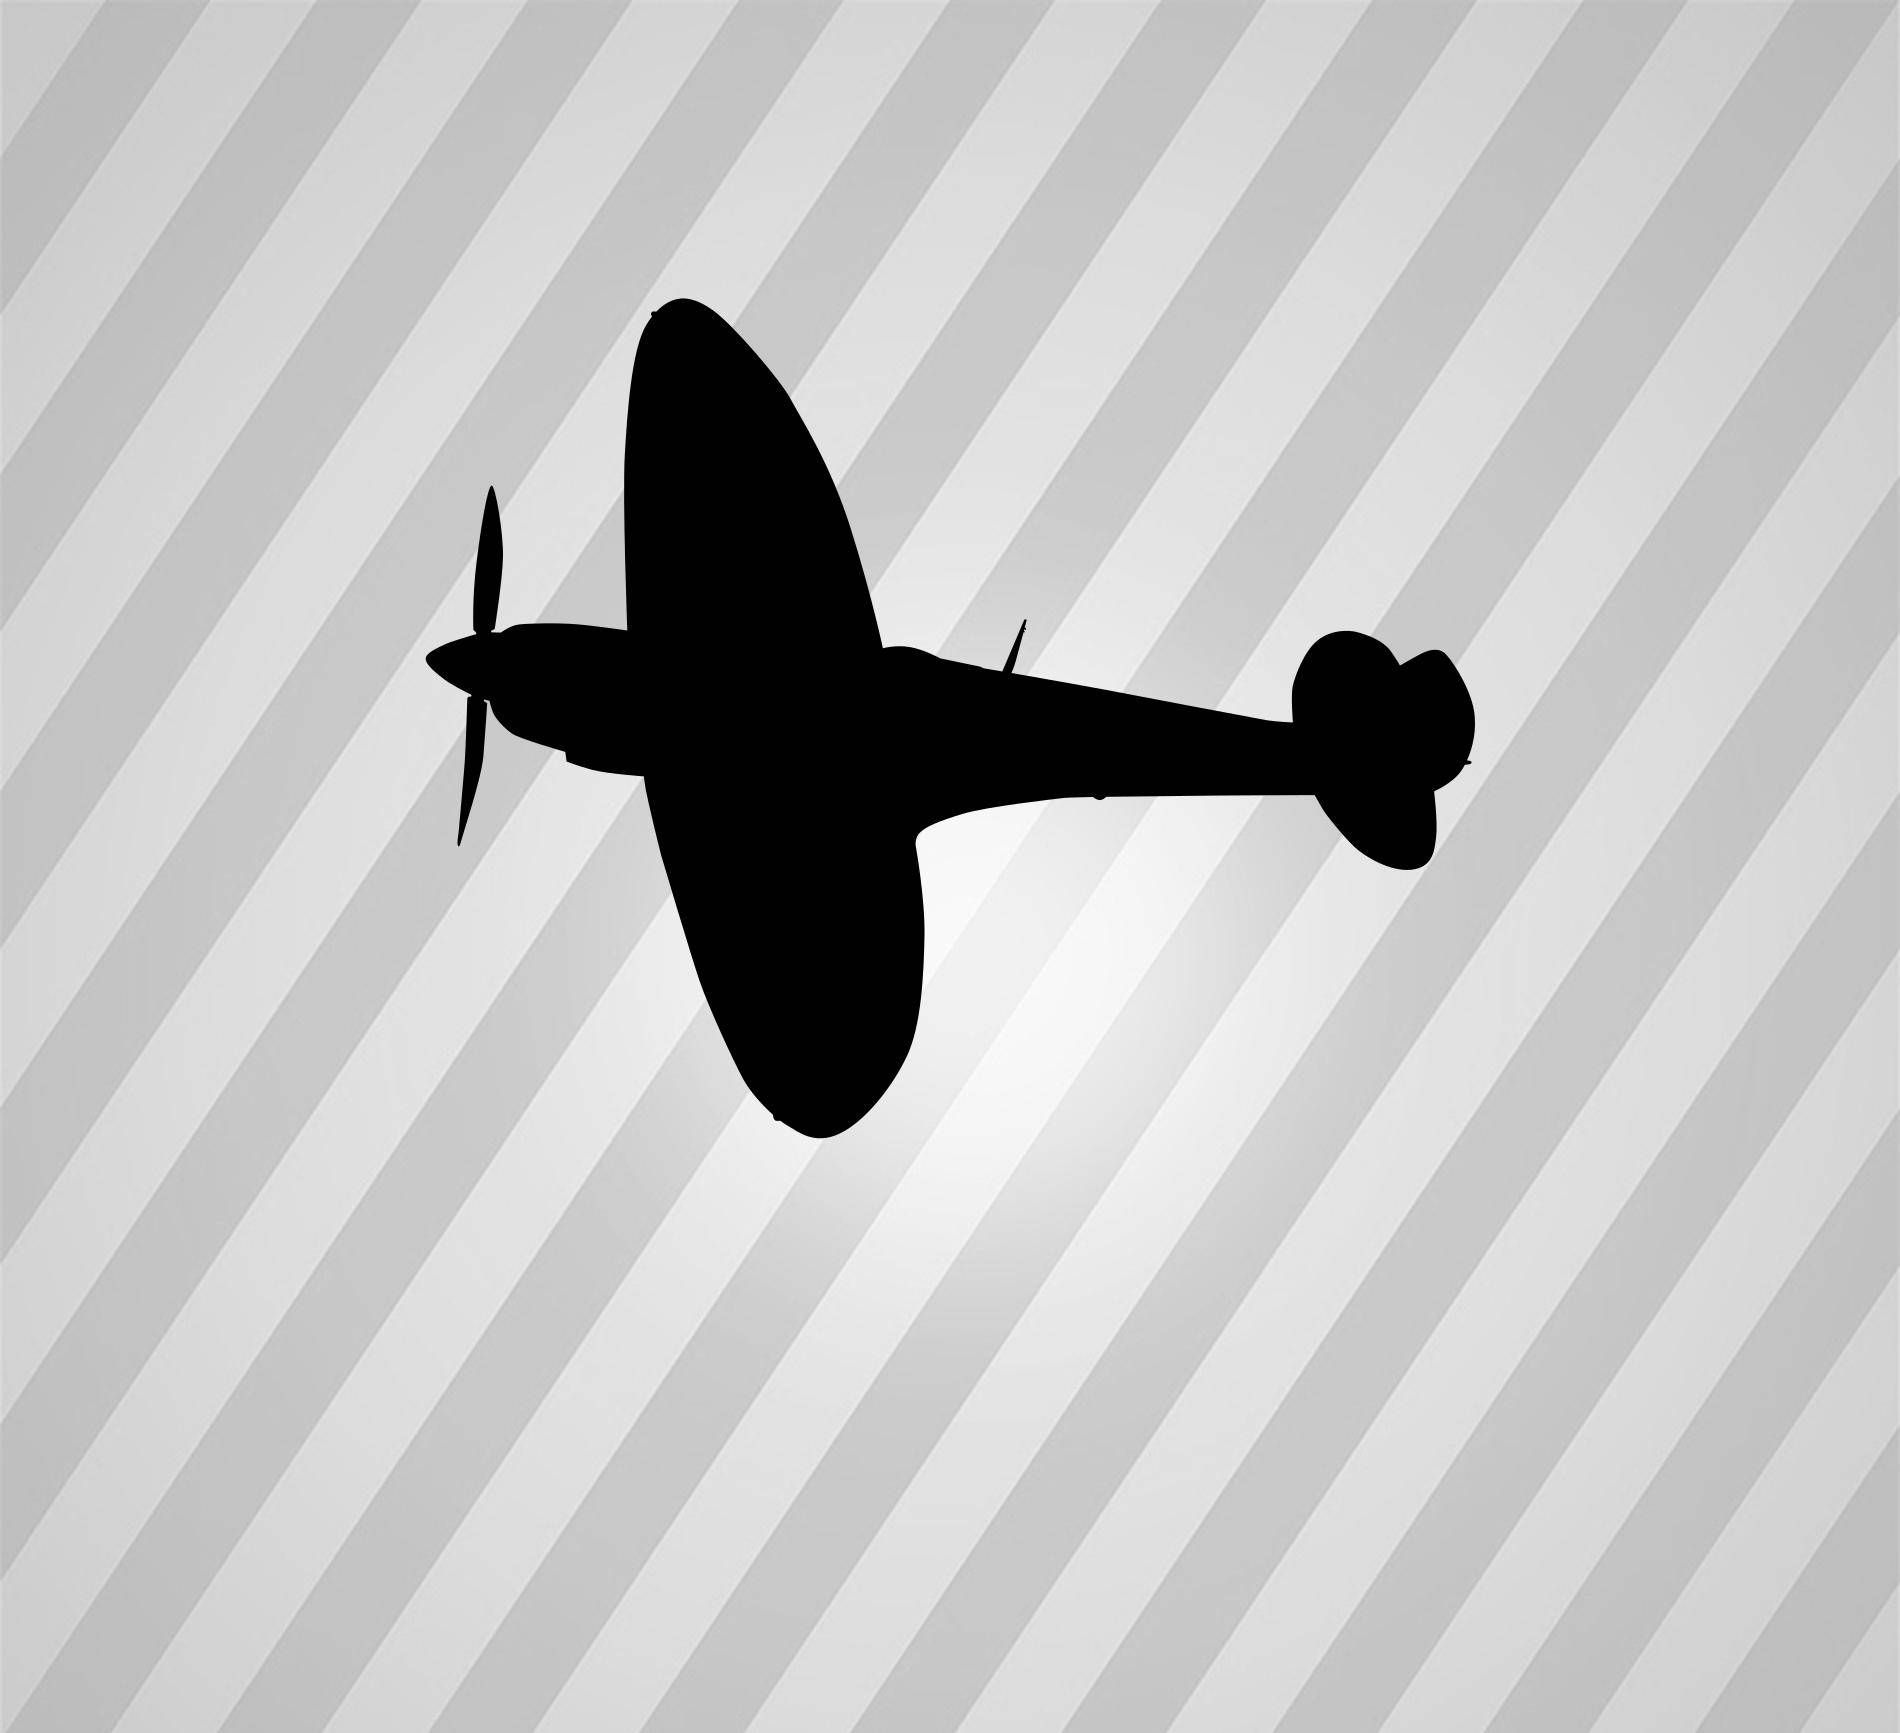 Download Spitfire Silhouette Vector at Vectorified.com | Collection of Spitfire Silhouette Vector free ...